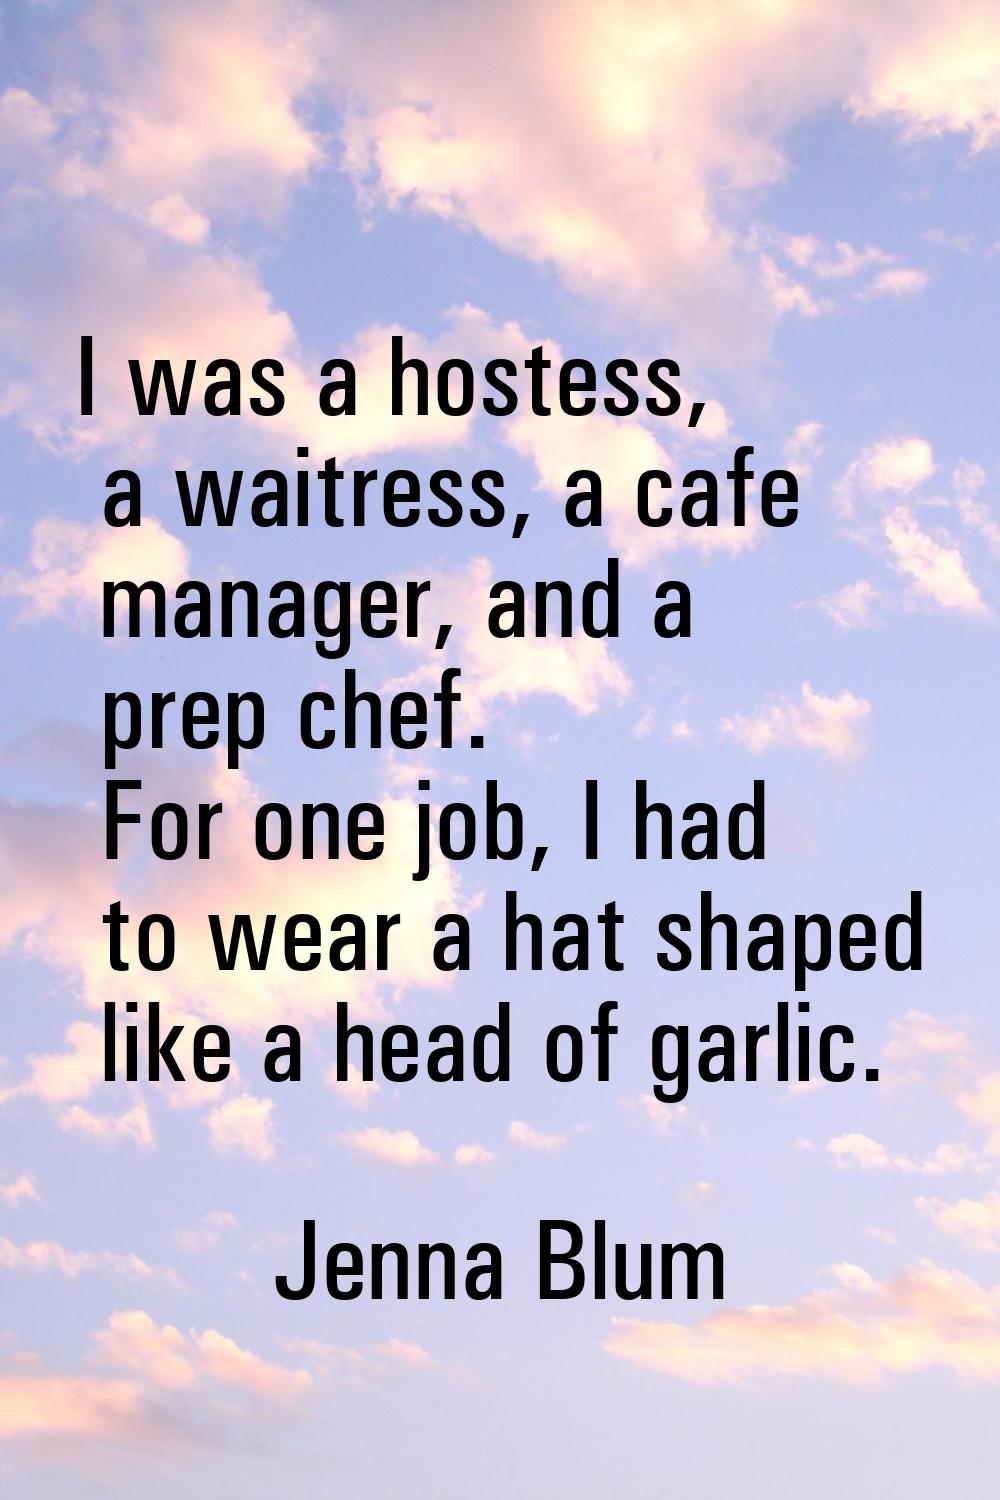 I was a hostess, a waitress, a cafe manager, and a prep chef. For one job, I had to wear a hat shap